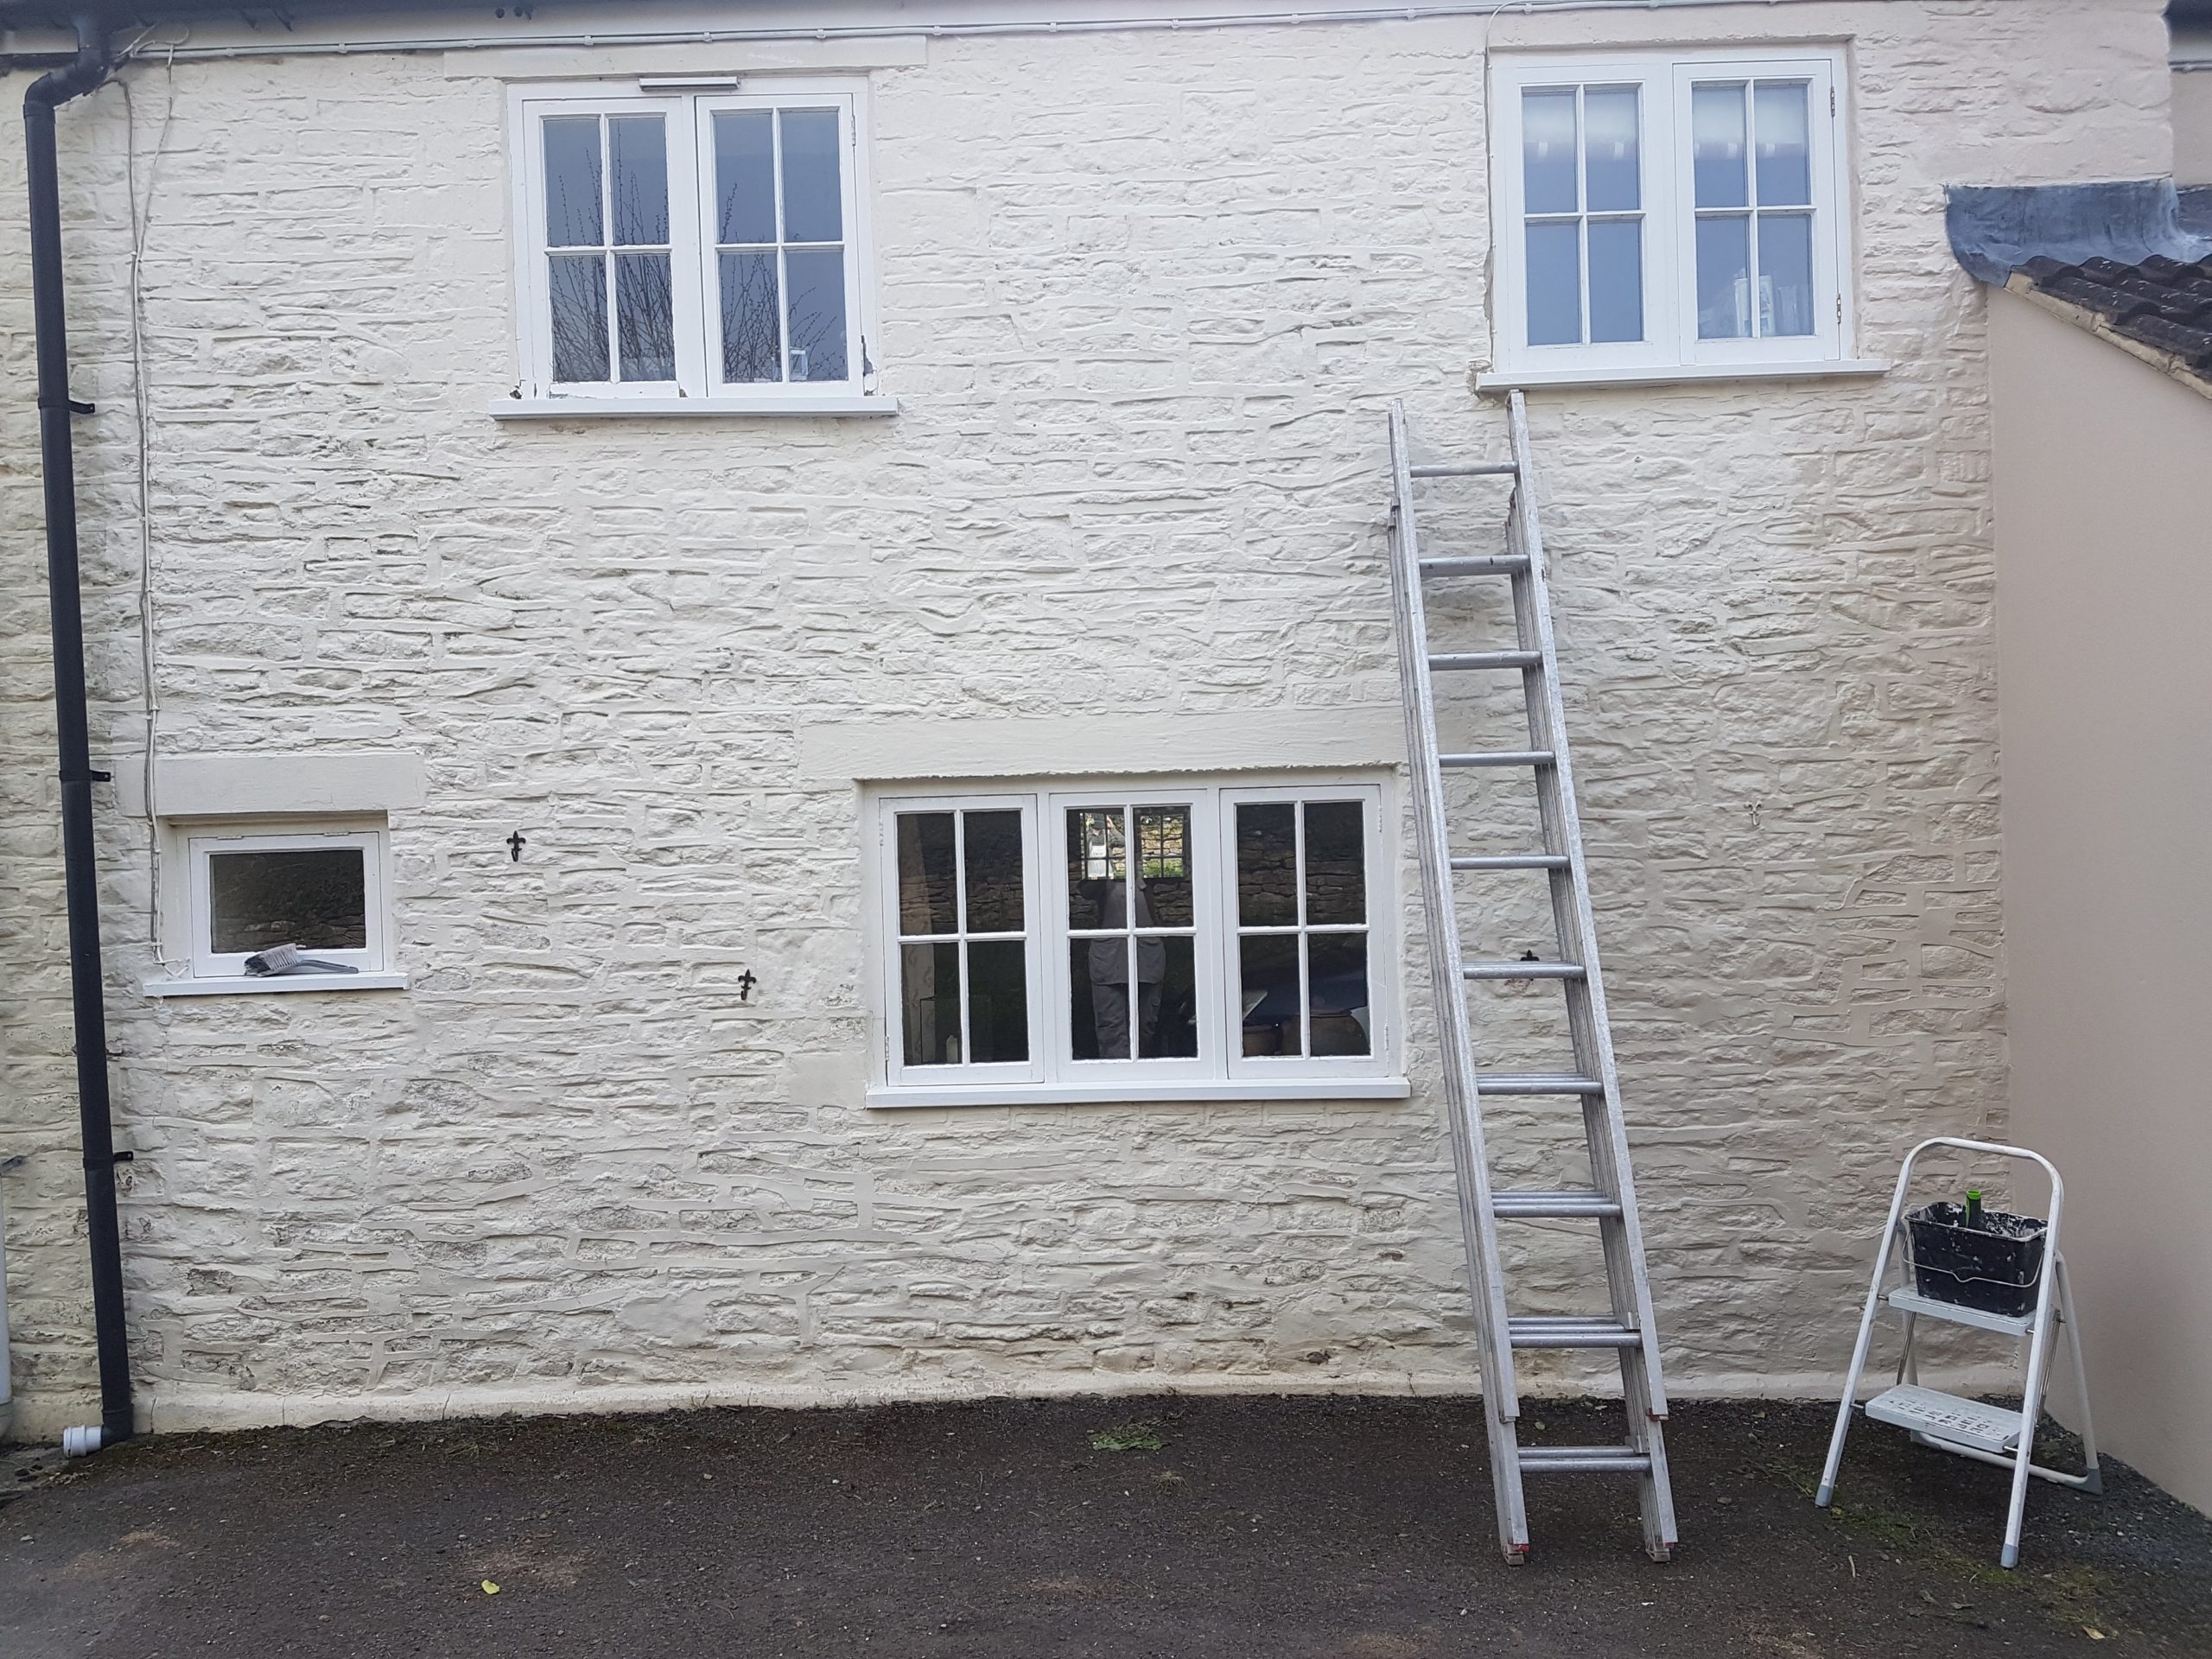 painting|exterior|house|home|garden|sunny|summer|day|white|window|doors|ladder